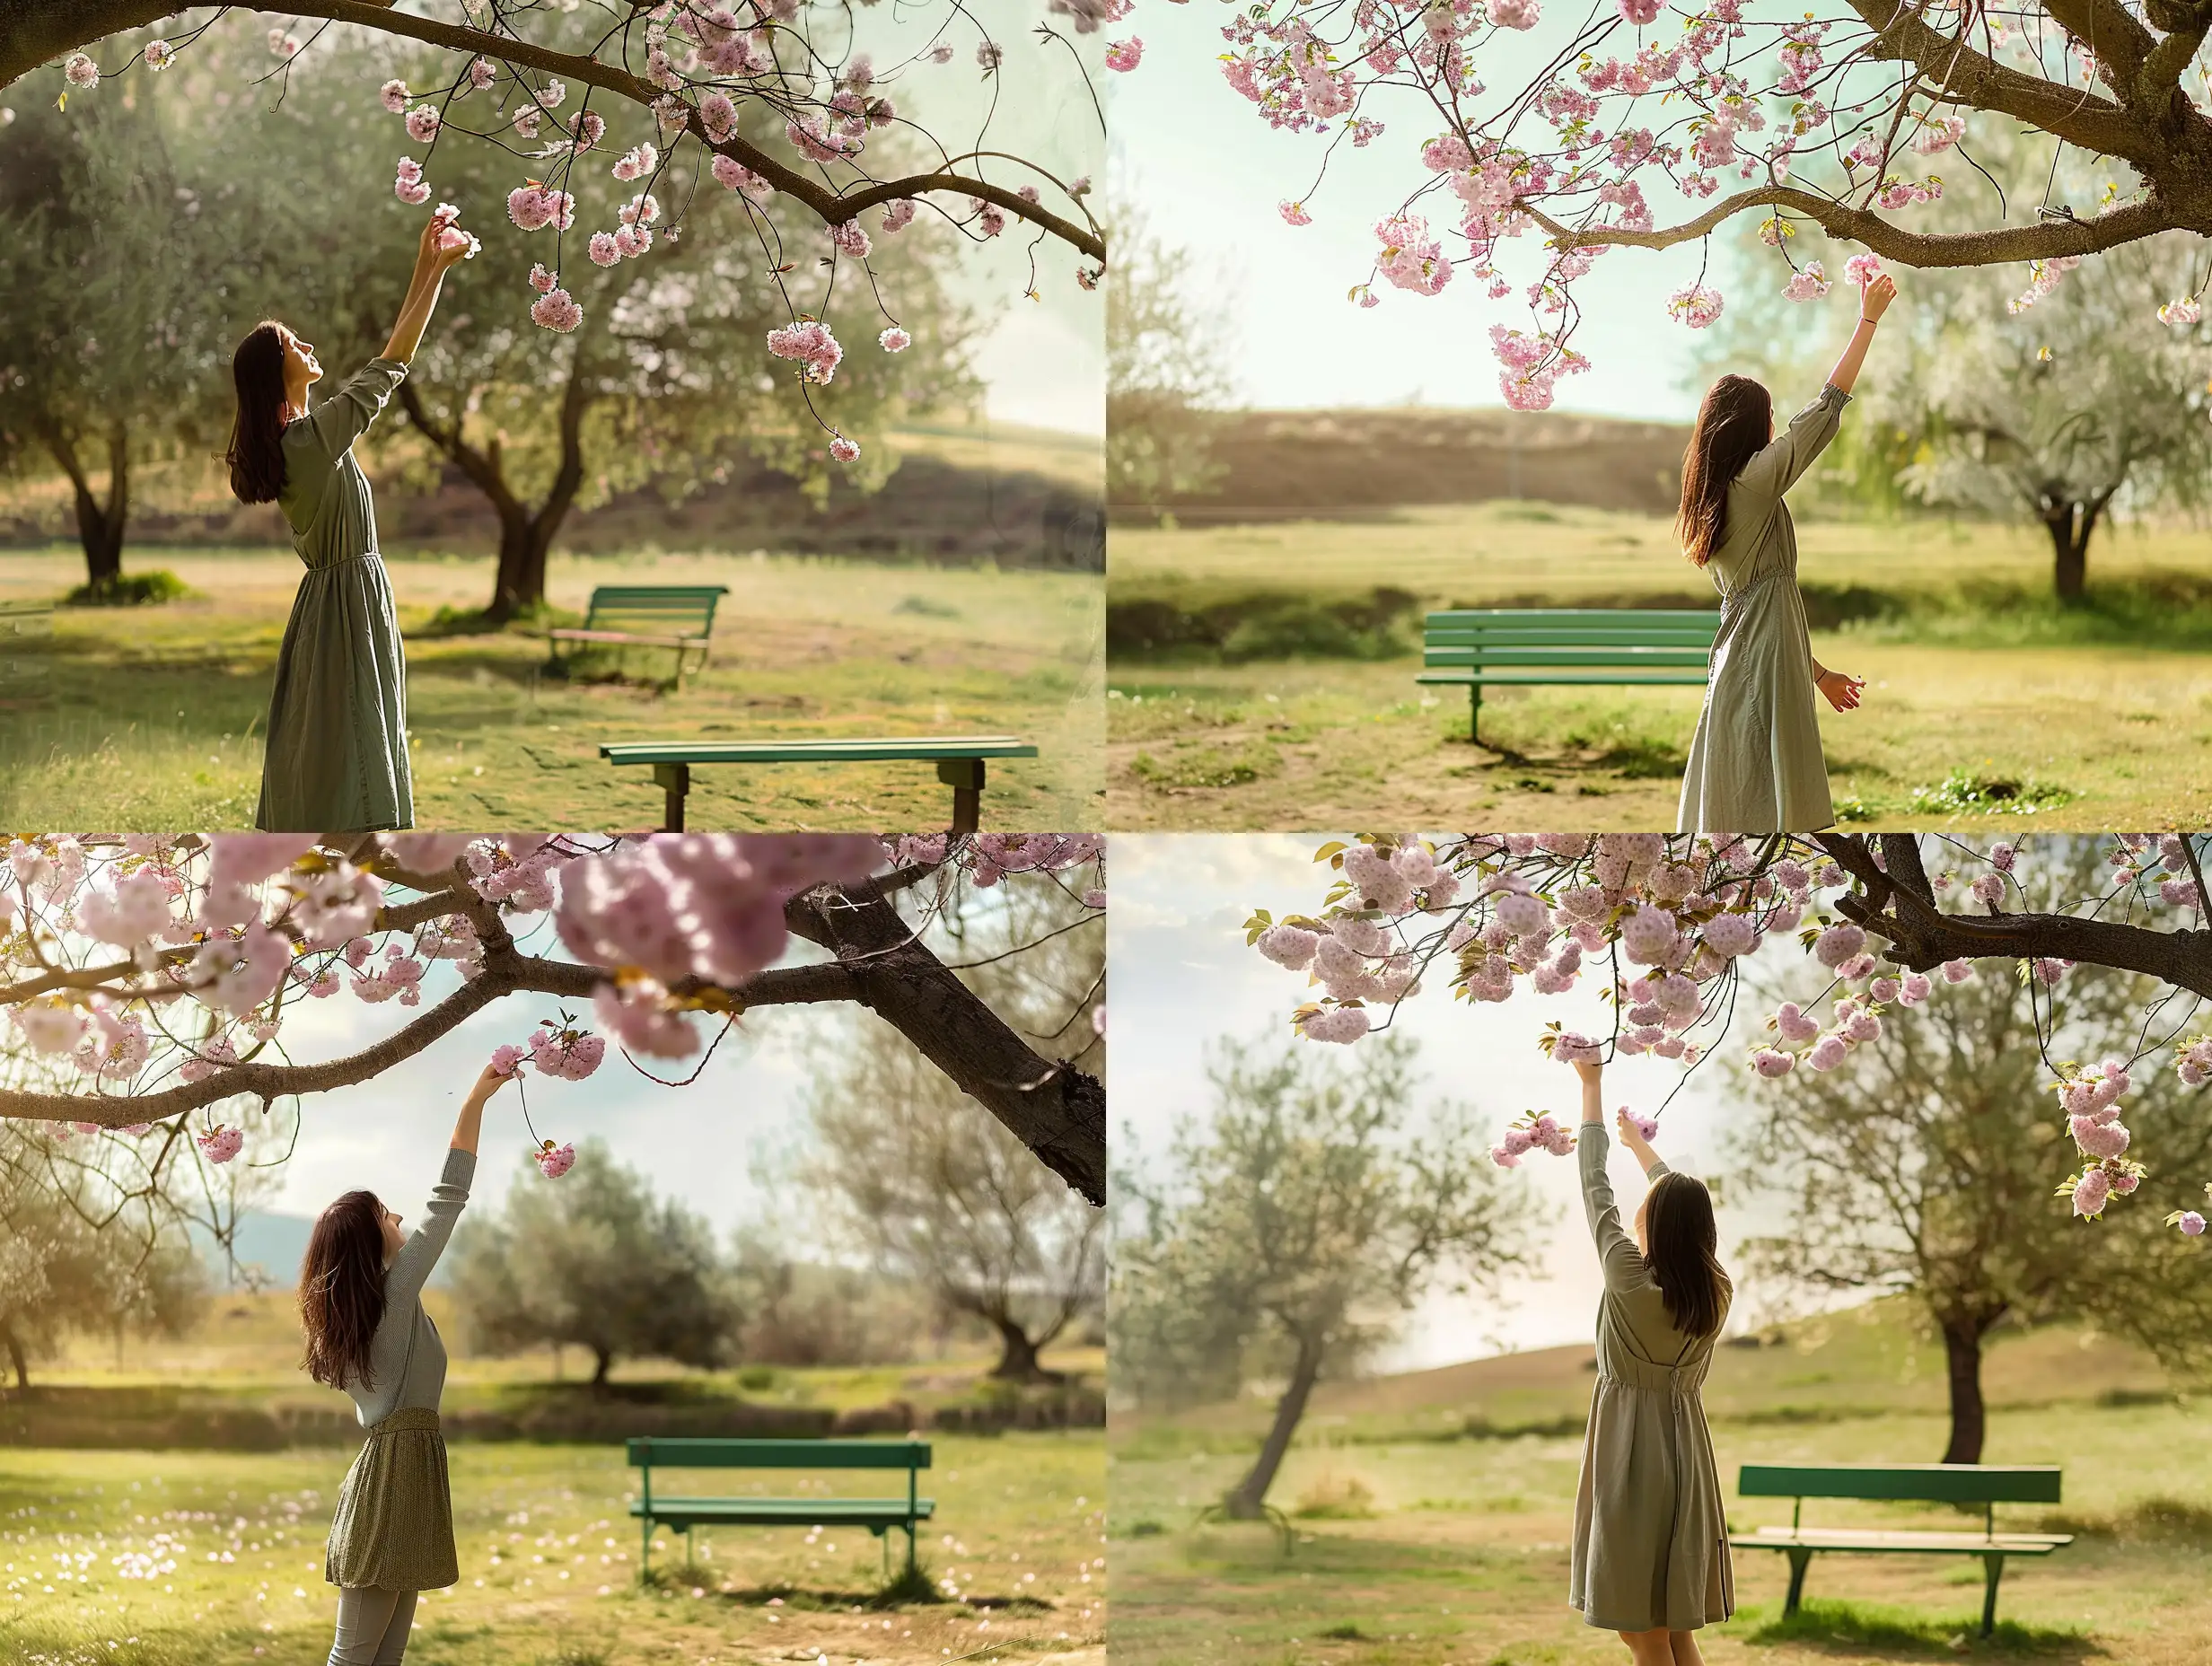 A woman stands in a field, reaching up to pick a pink flower from a tree. There's a green bench nearby and a small hill in the distance., Nostalgia, --ar 9:16 --weird 53 --seed 36